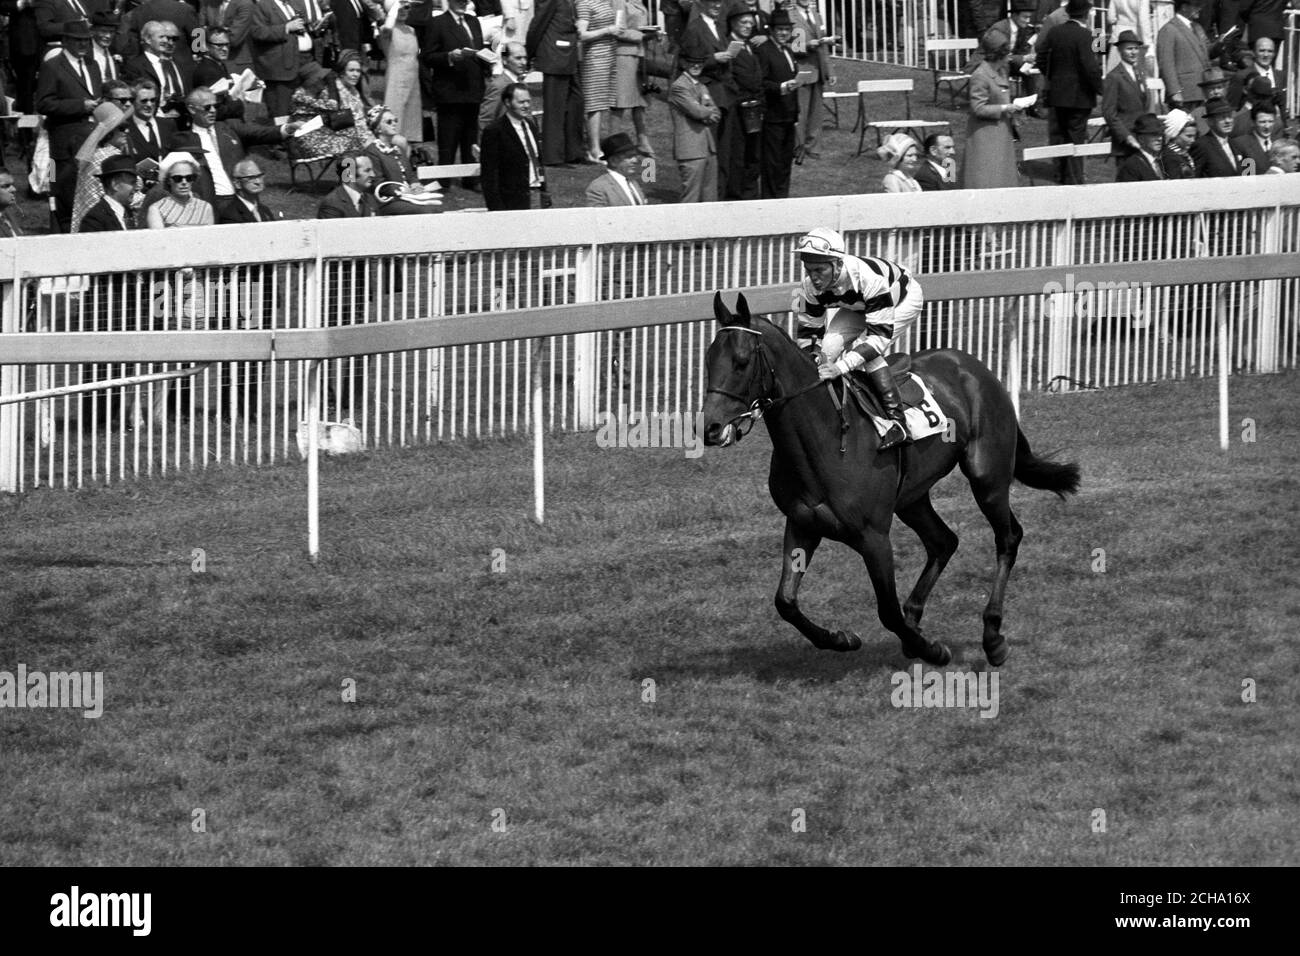 G.A. Oldham's Stintino, jockey is A. Barclay, an entry for the KingGeorge Vi and Queen Elizabeth Stakes at Ascot. Stock Photo